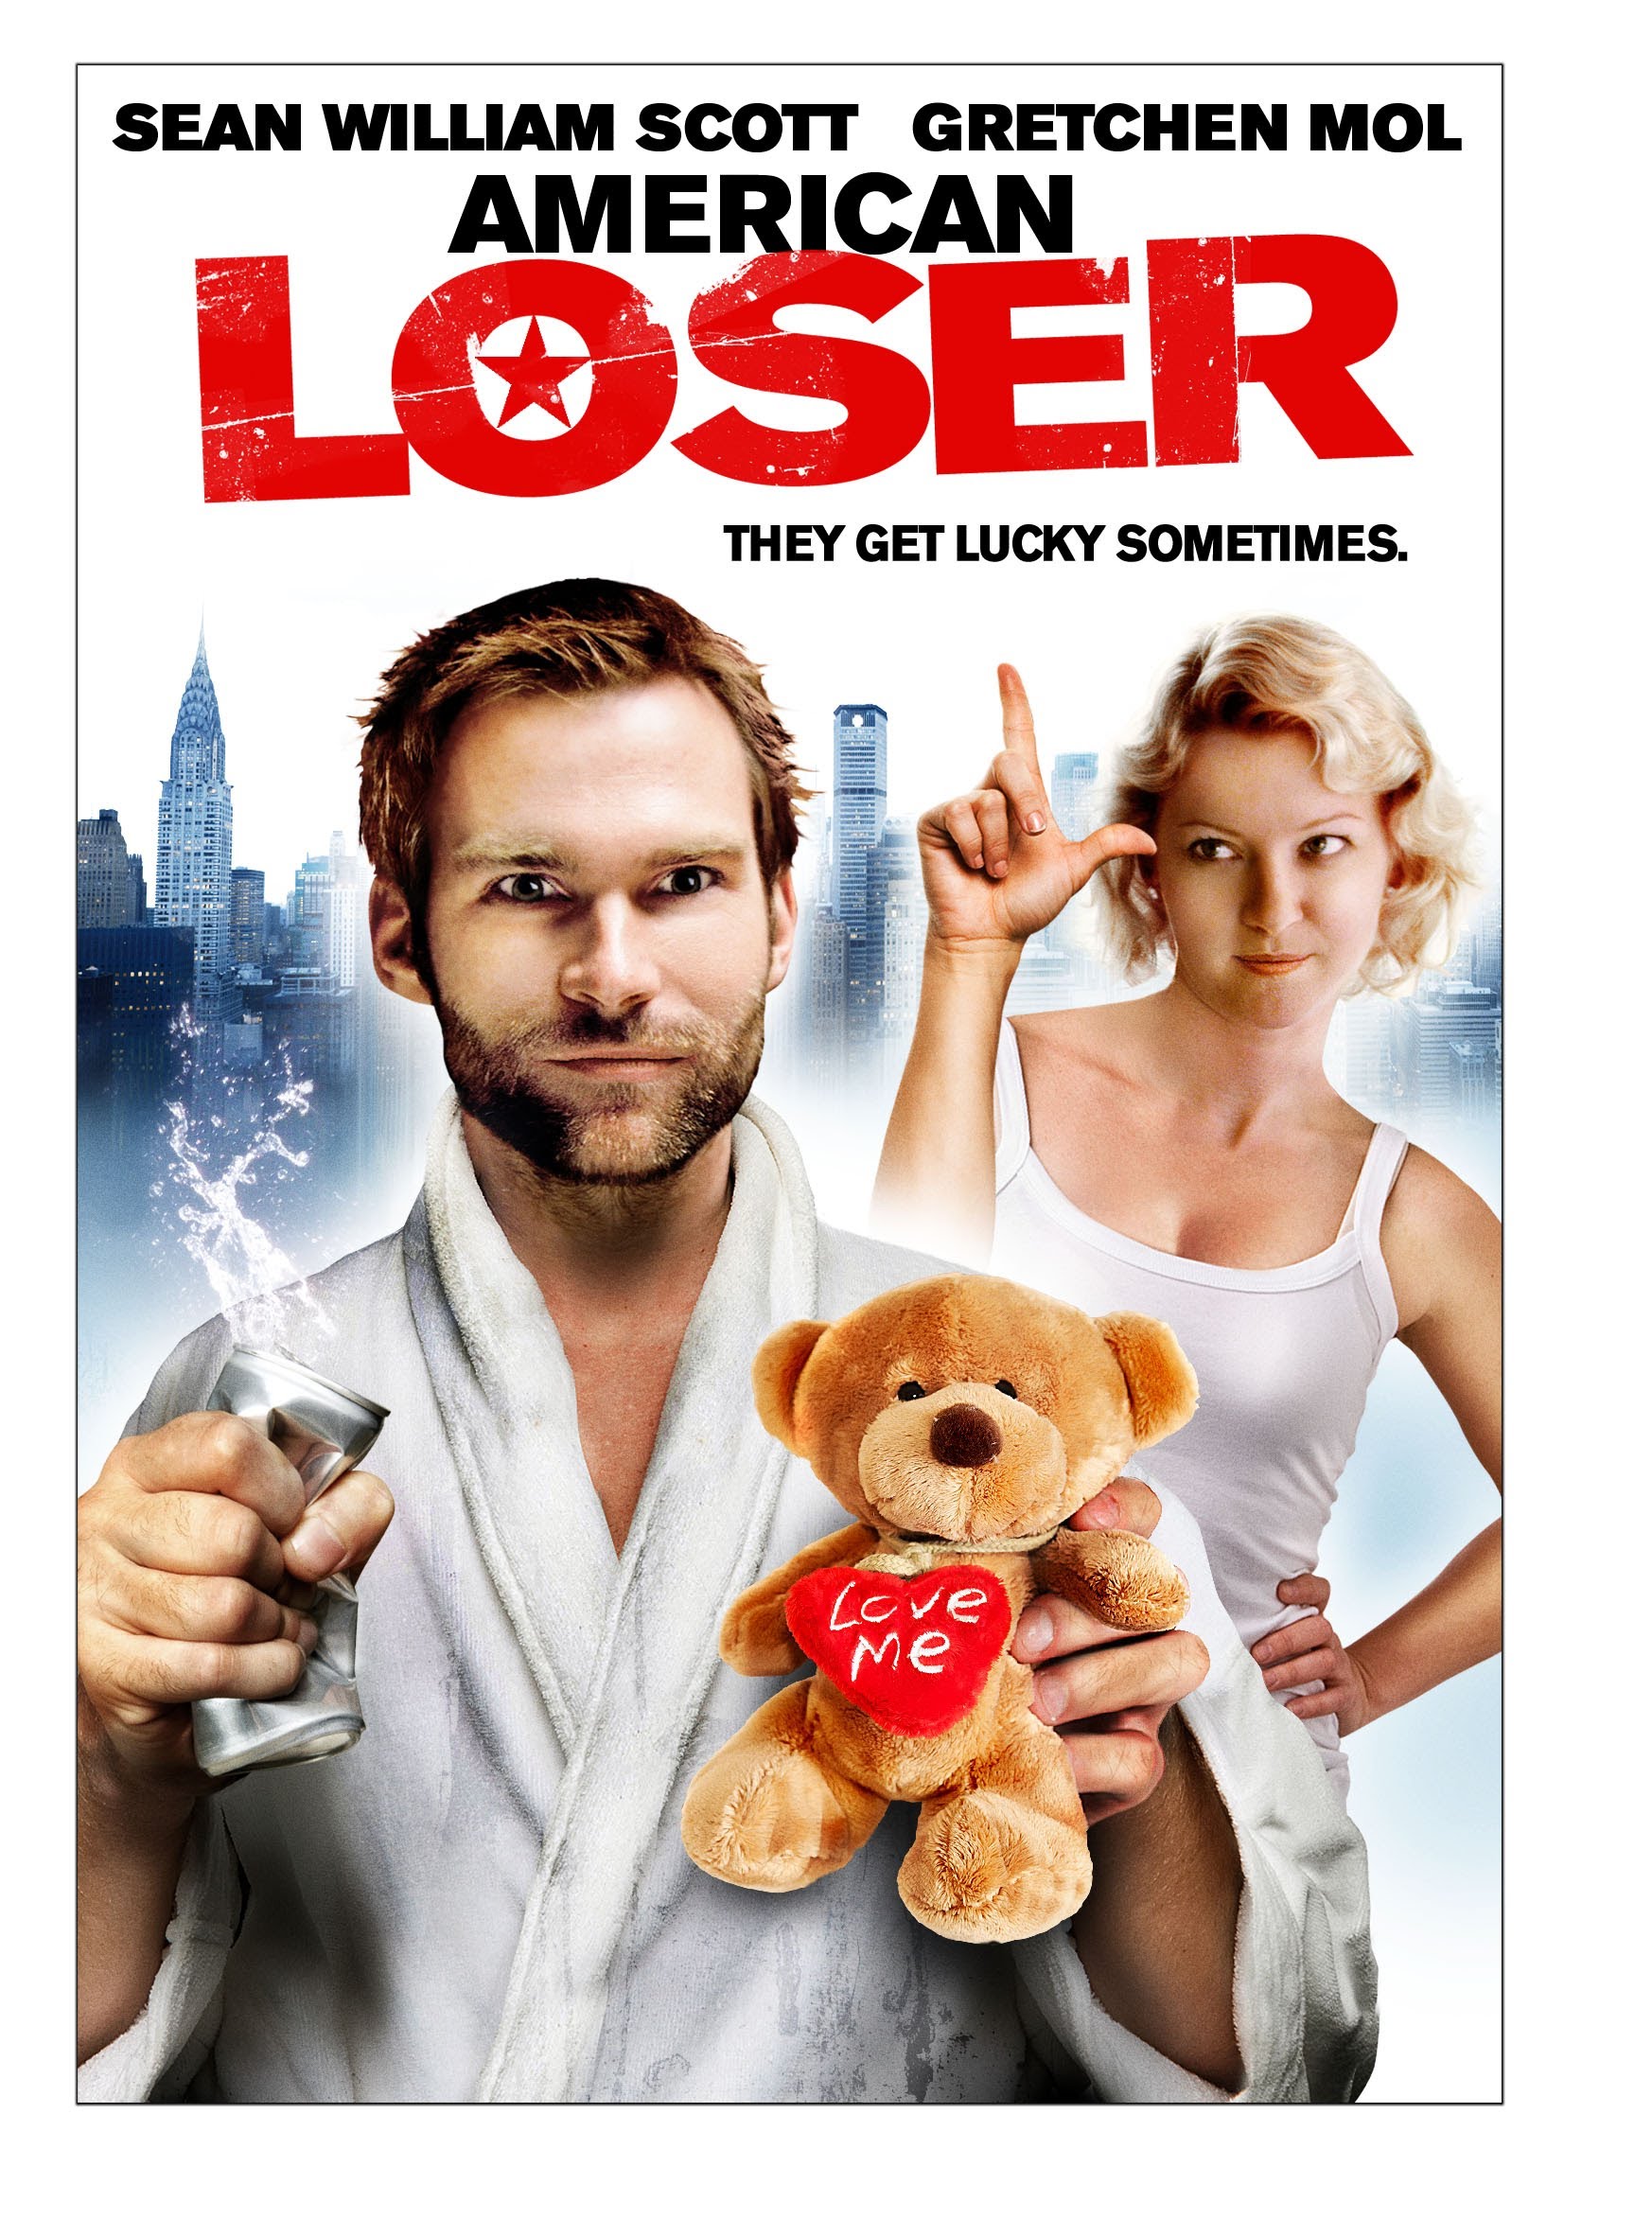 American Loser (Trainwreck: My Life as an Idiot)